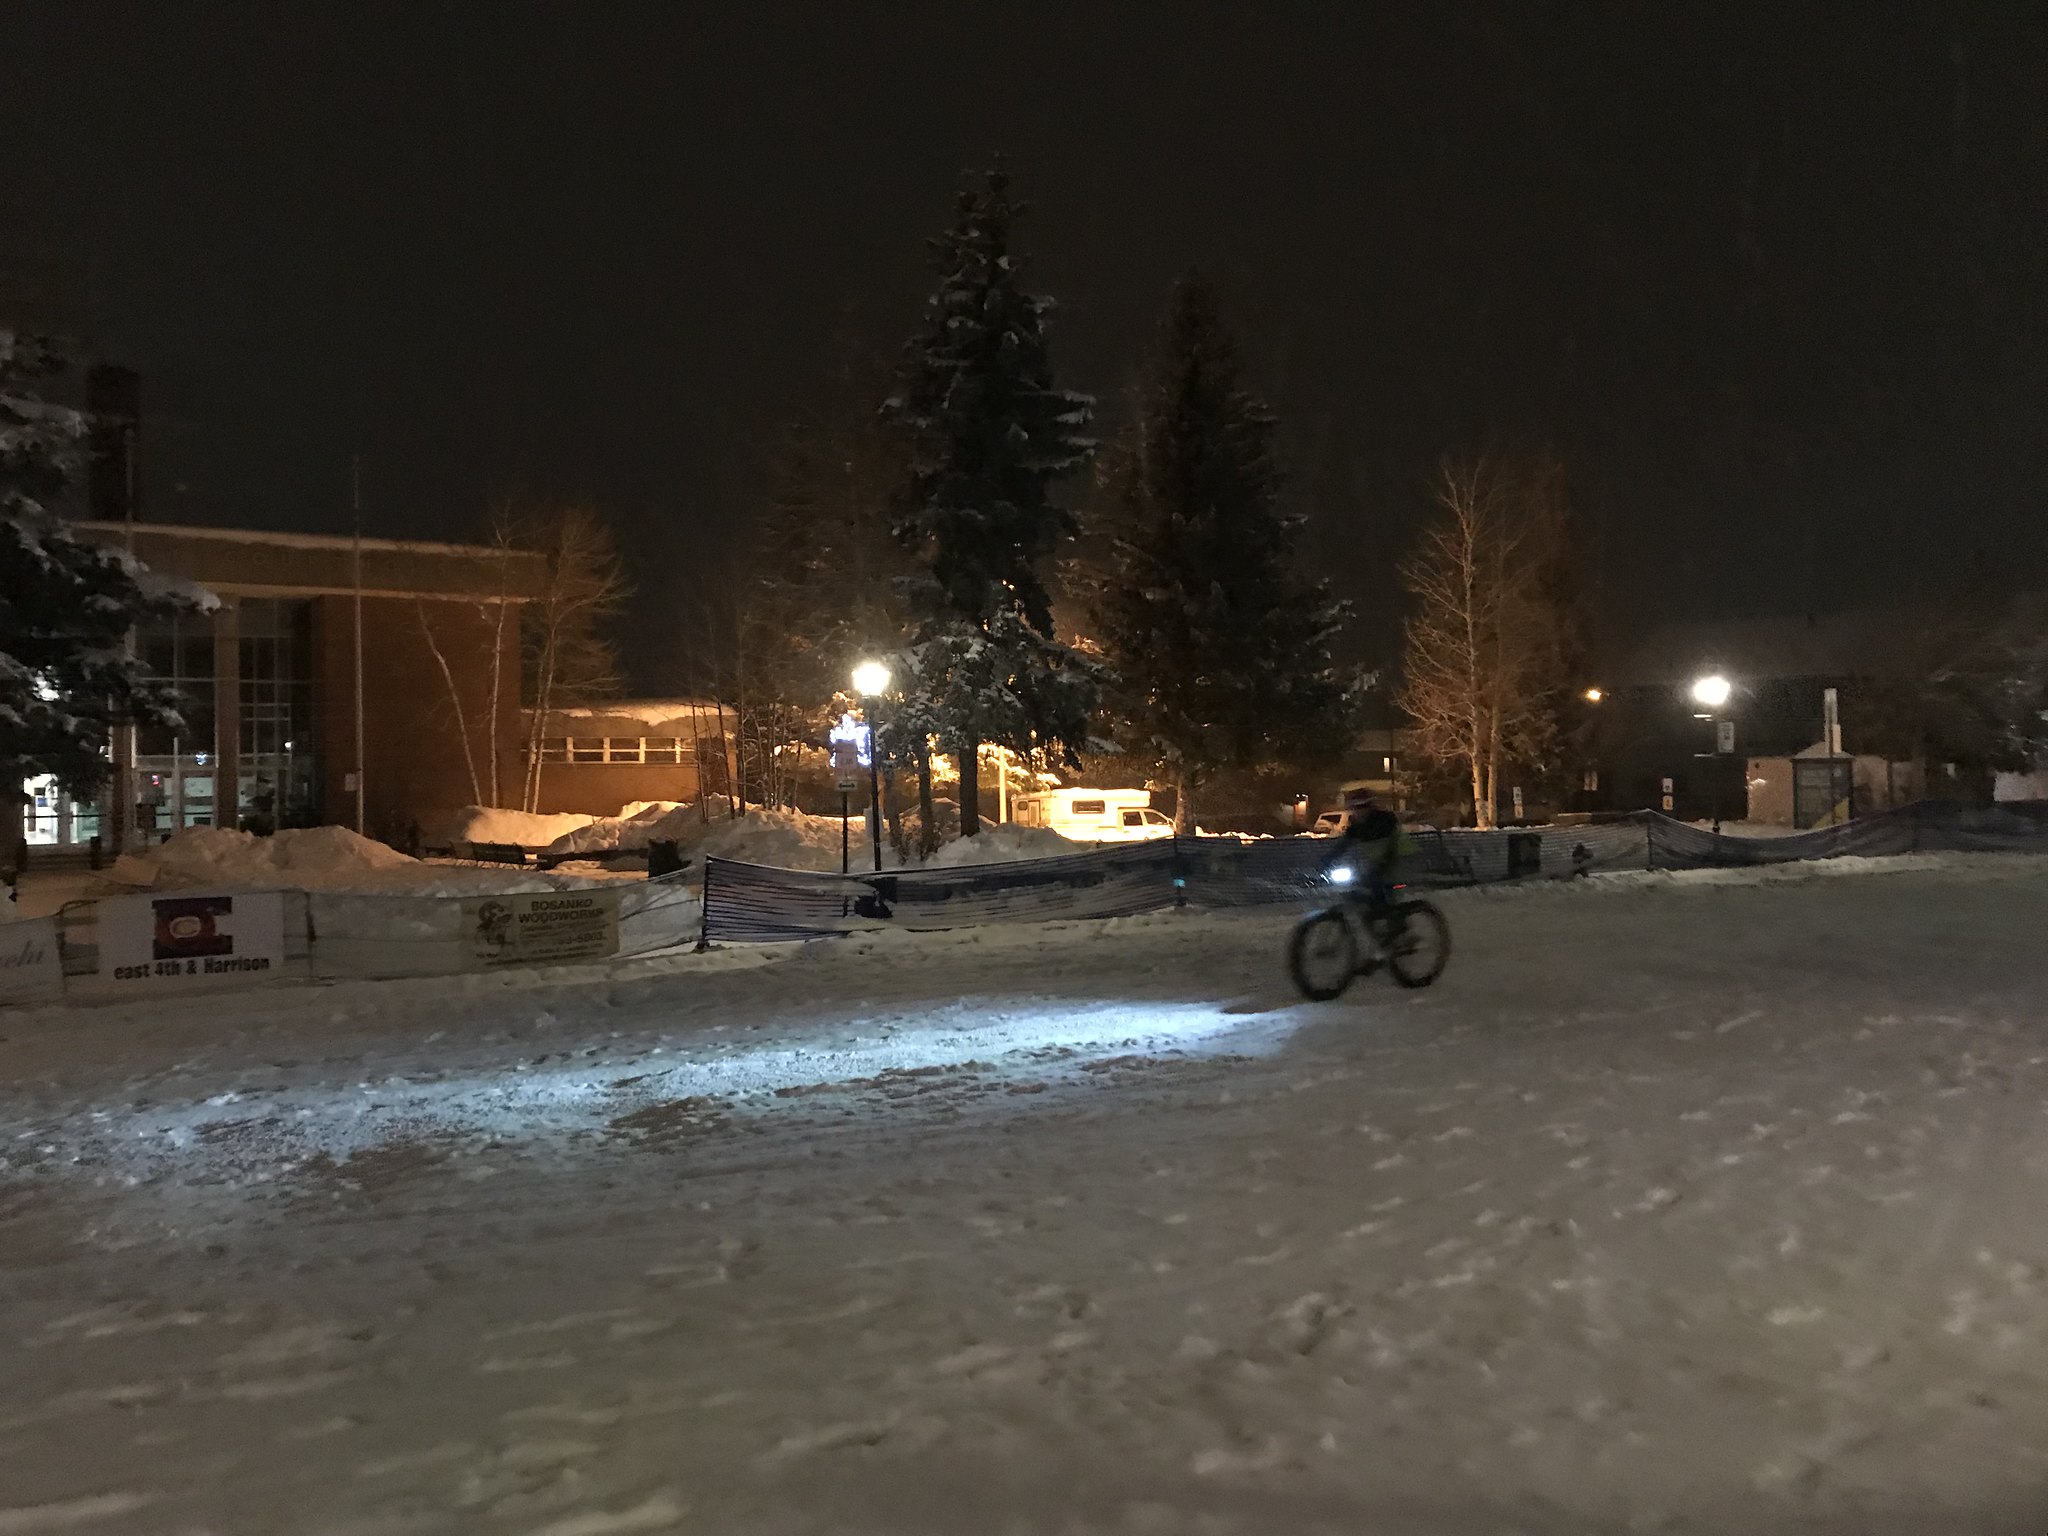 Someone riding a bicycle in the evening on a snowy street